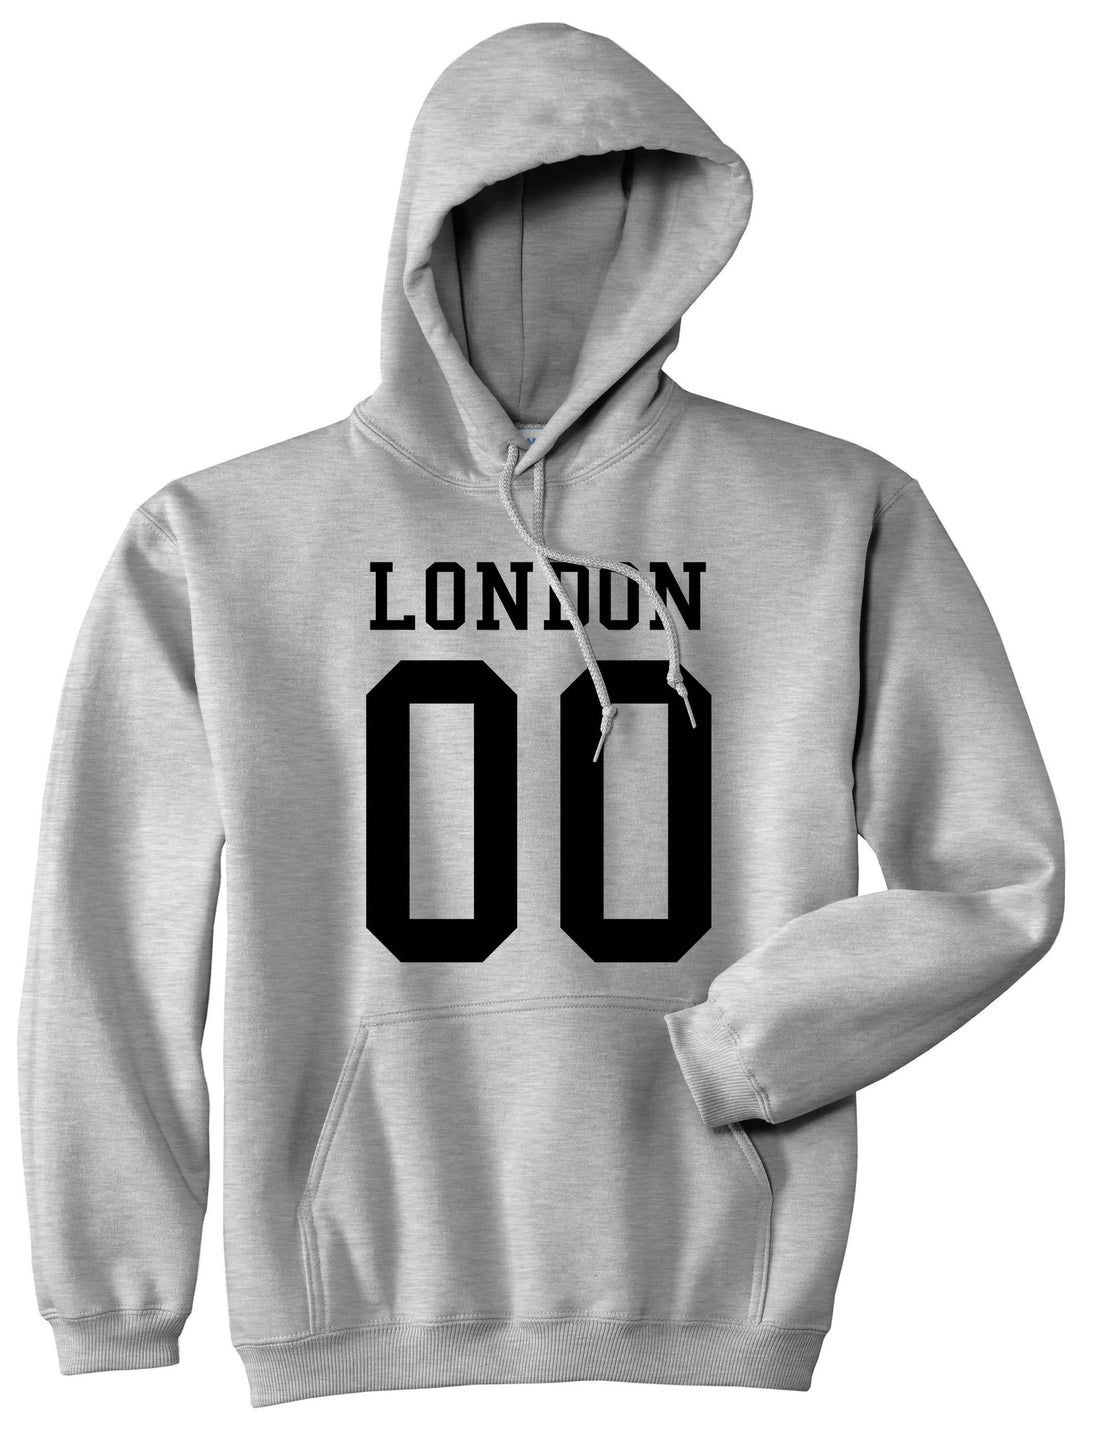 London Team 00 Jersey Pullover Hoodie in Grey By Kings Of NY